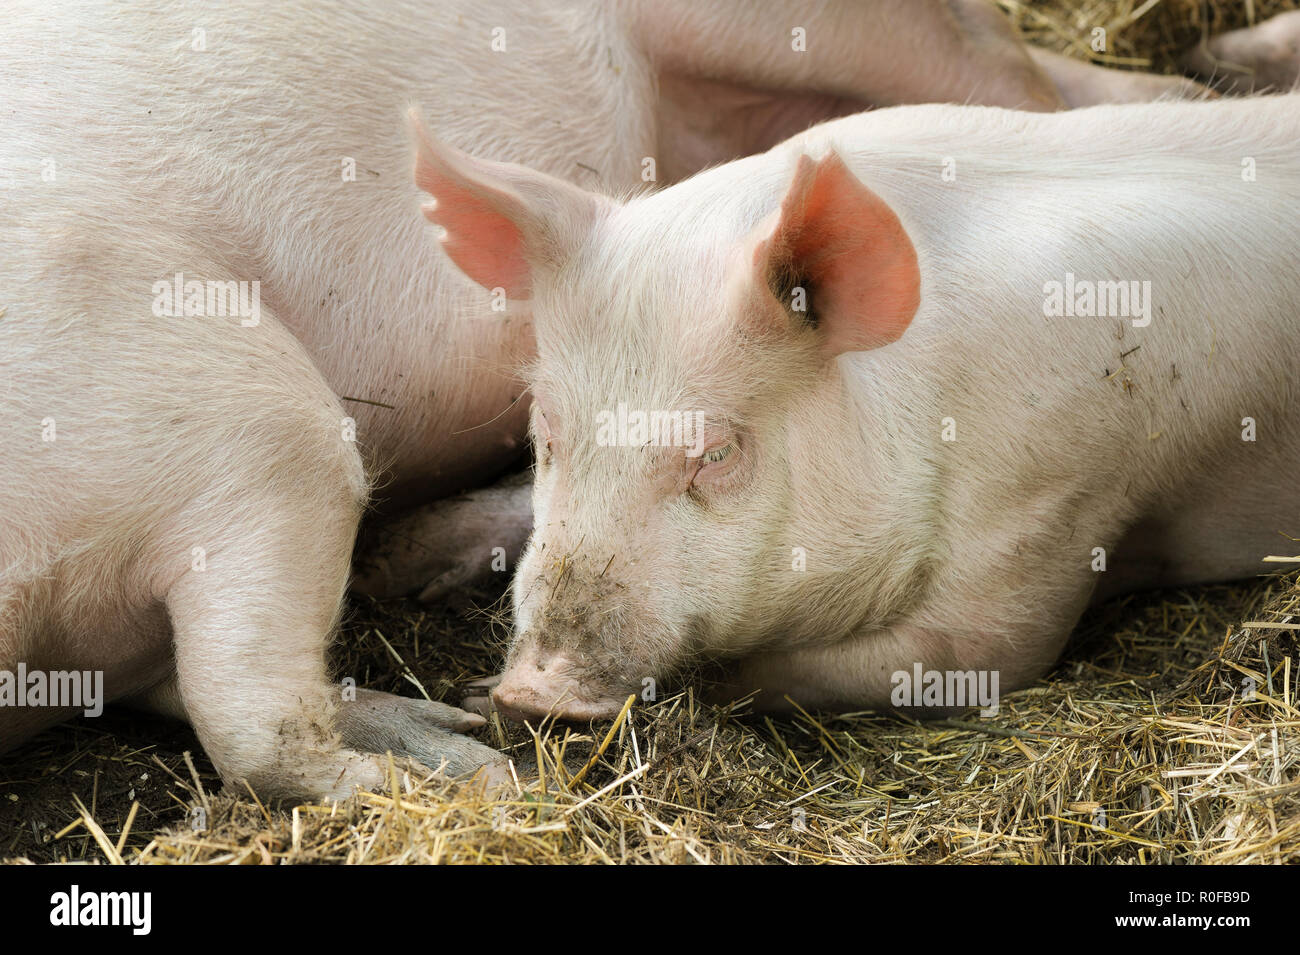 Pigs laying on hay and straw Stock Photo